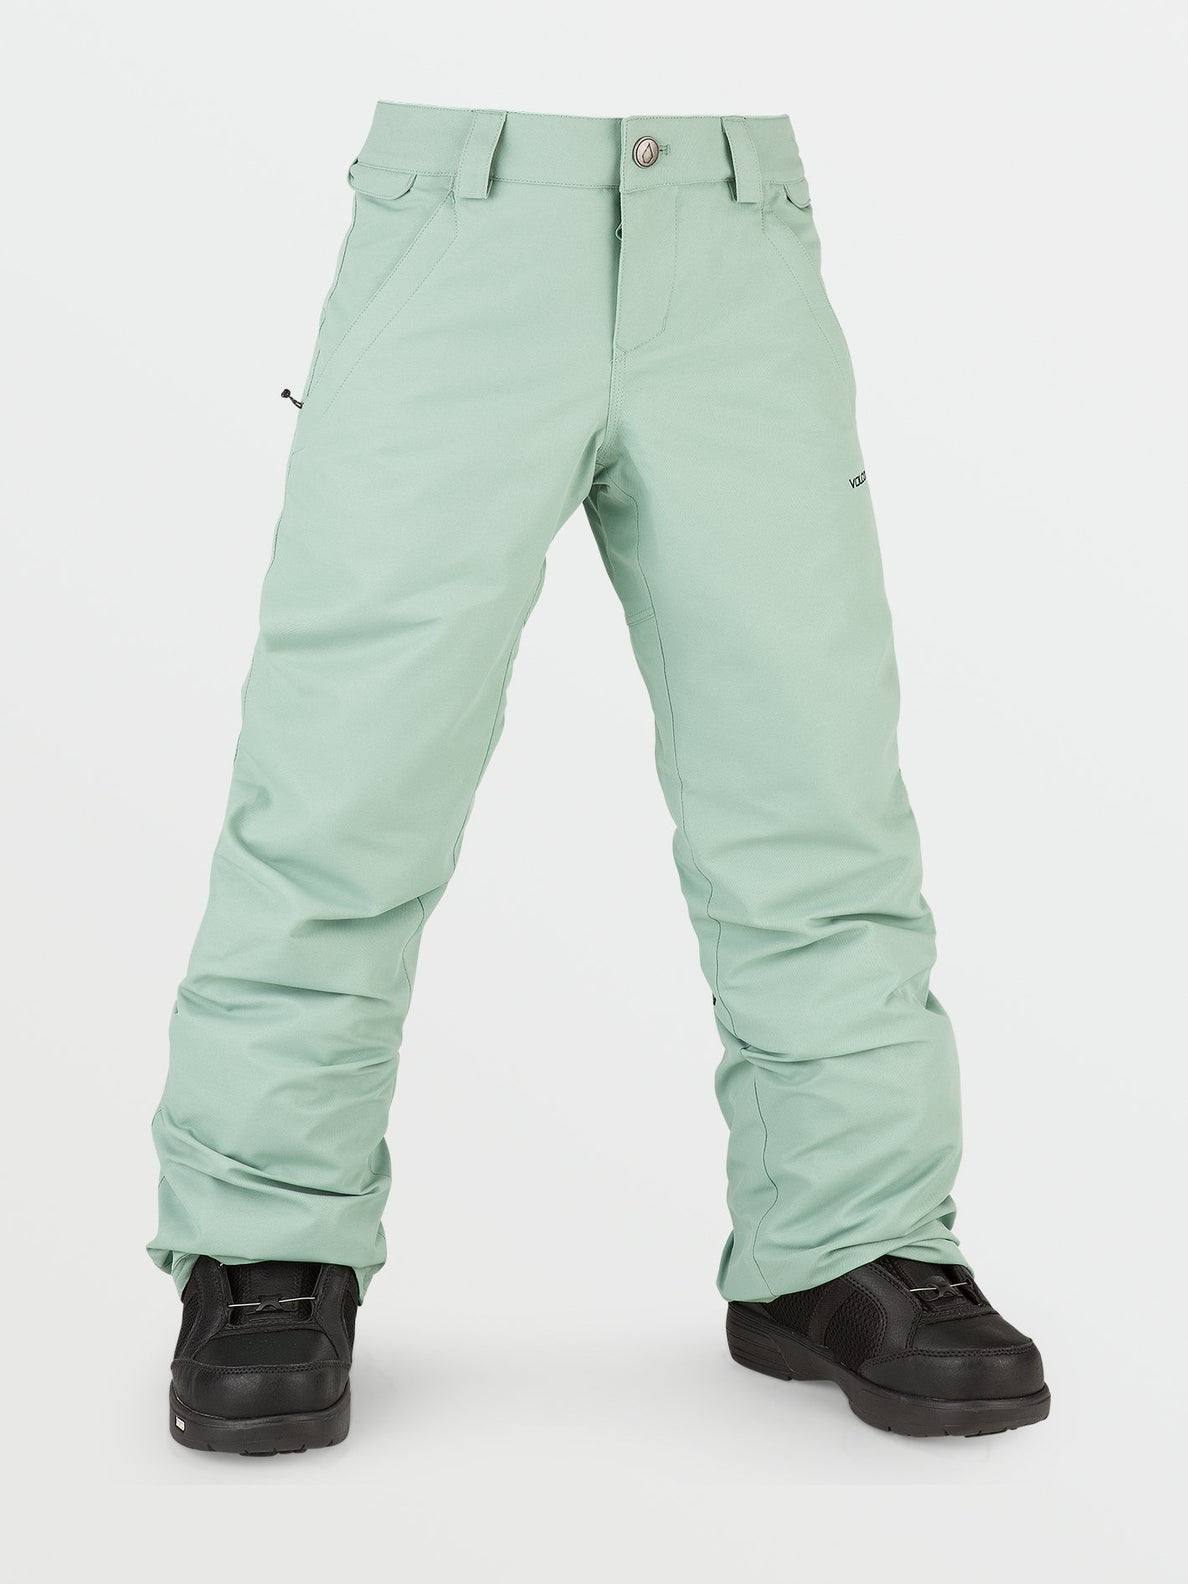 Frochickidee Insulated Trousers - MINT - (KIDS) (N1252202_MNT) [F]